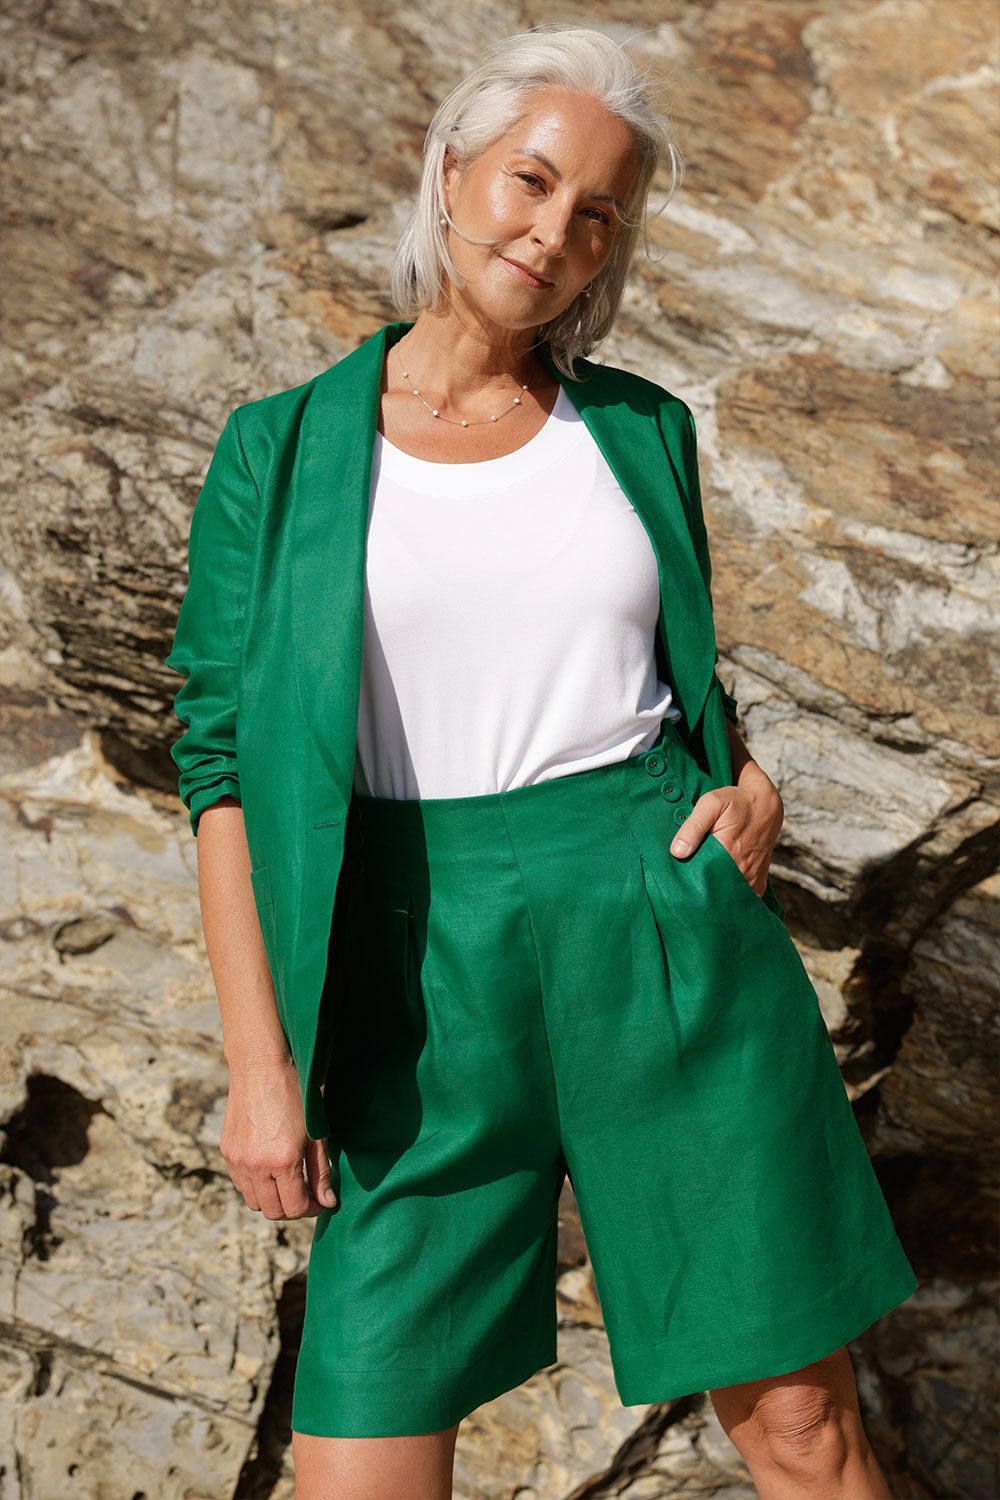 A mature woman wears 100% Linen Bermuda shorts. The perfect smart casual shorts suitable for summer workwear to take you through to the weekend. Styled back with a soft tailored emerald green linen blazer.  Both in a beautiful emerald green colour and soft tailoring details. Designed and made in Australia for sizes 8 -24.